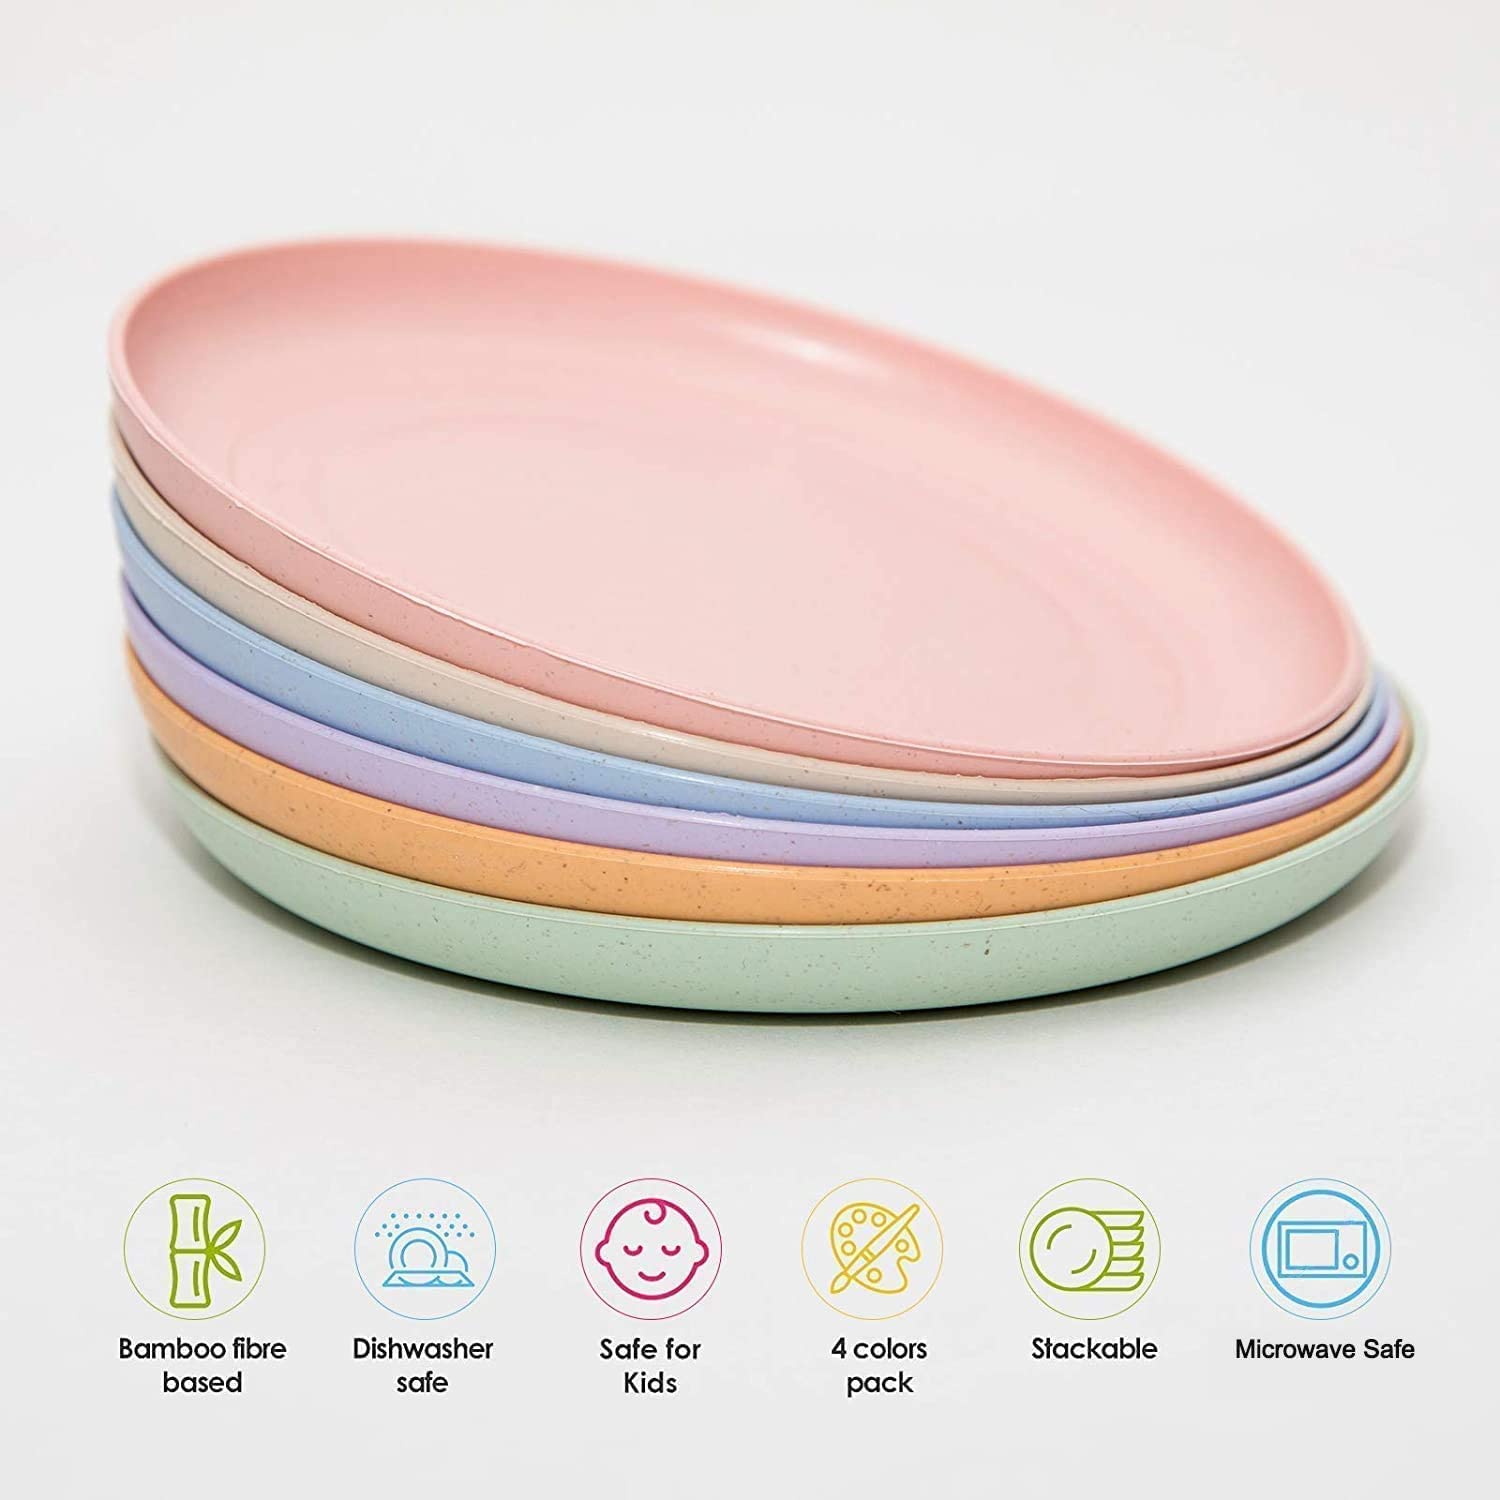 6 PACK 6 Inches Lightweight Mini Wheat Straw Plates Reusable Plate Set Dishwasher & Microwave Safe ,Unbreakable Deep Dinner Plates, Plastic Plates Reusable,They are easy to clean BPA free